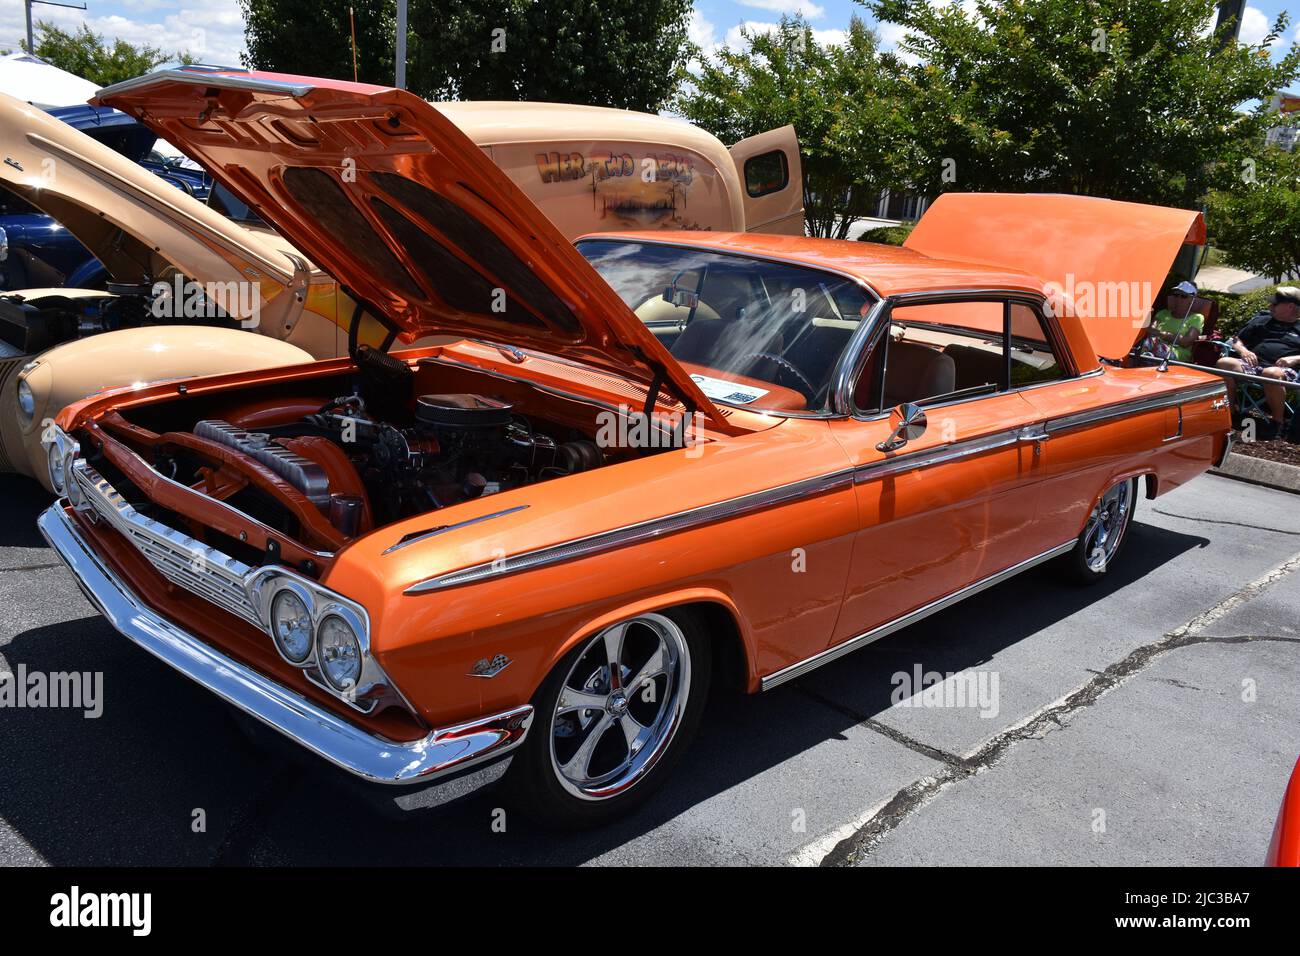 A 1963 Chevrolet Impala on display at a car show. Stock Photo